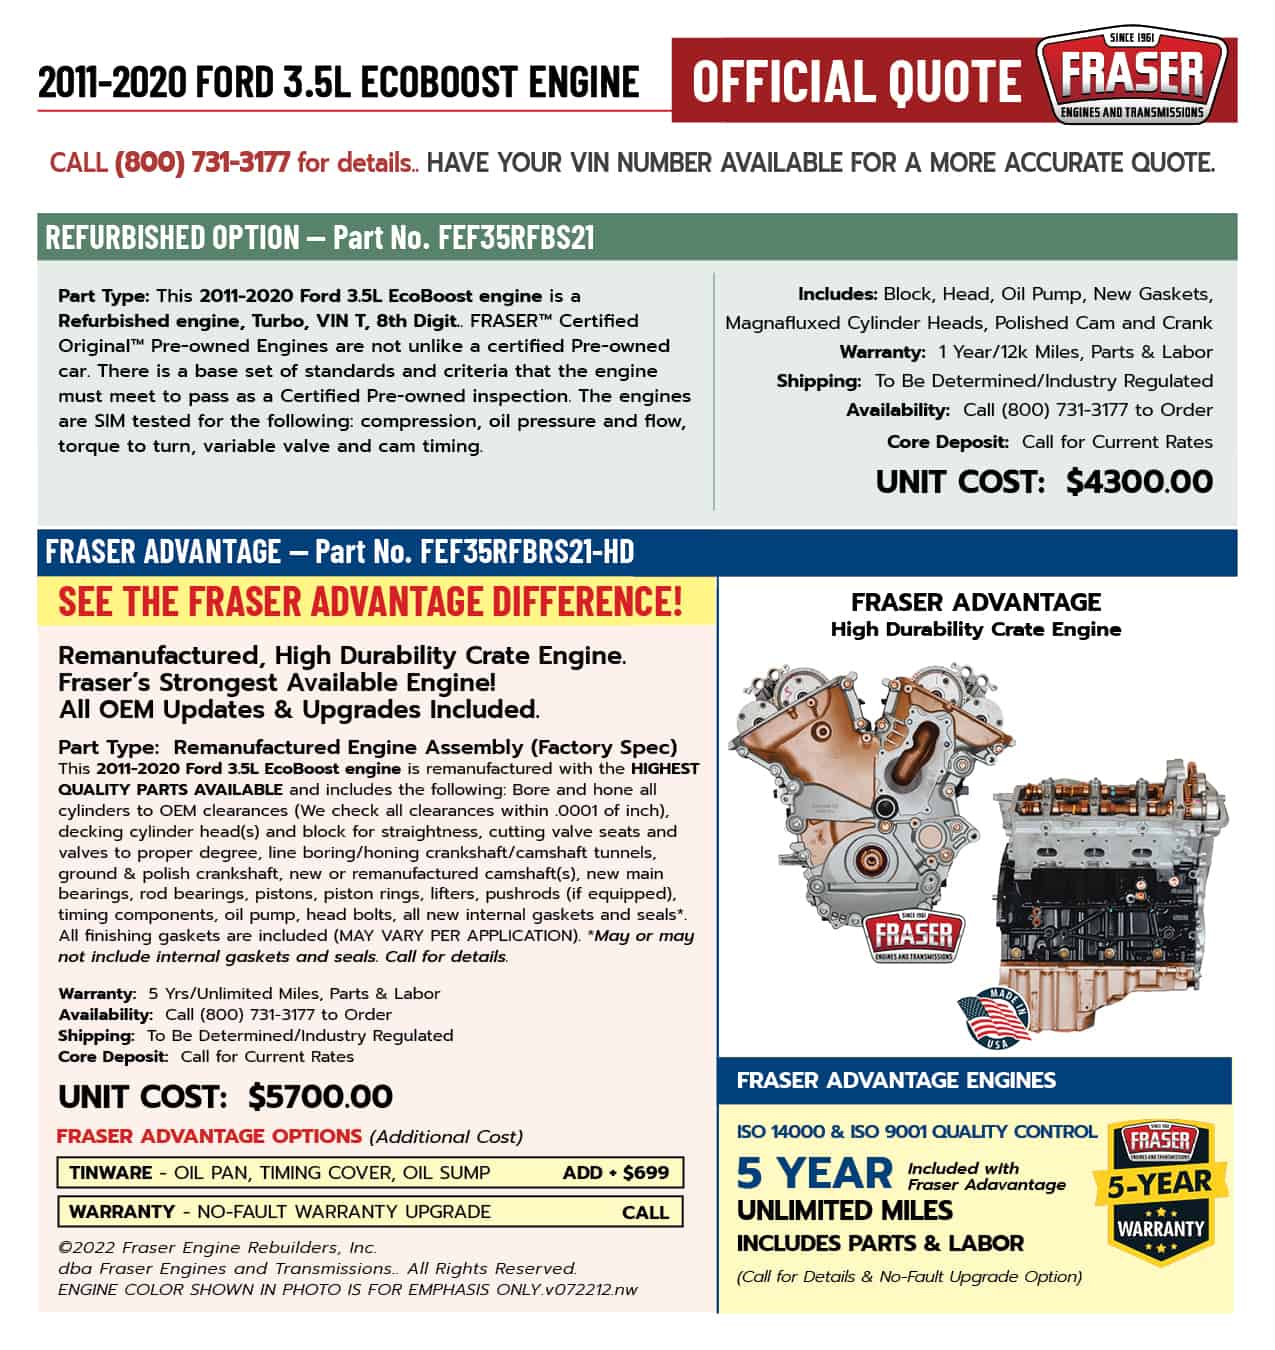 2011-2020 Ford 3.5L EcoBoost Engines